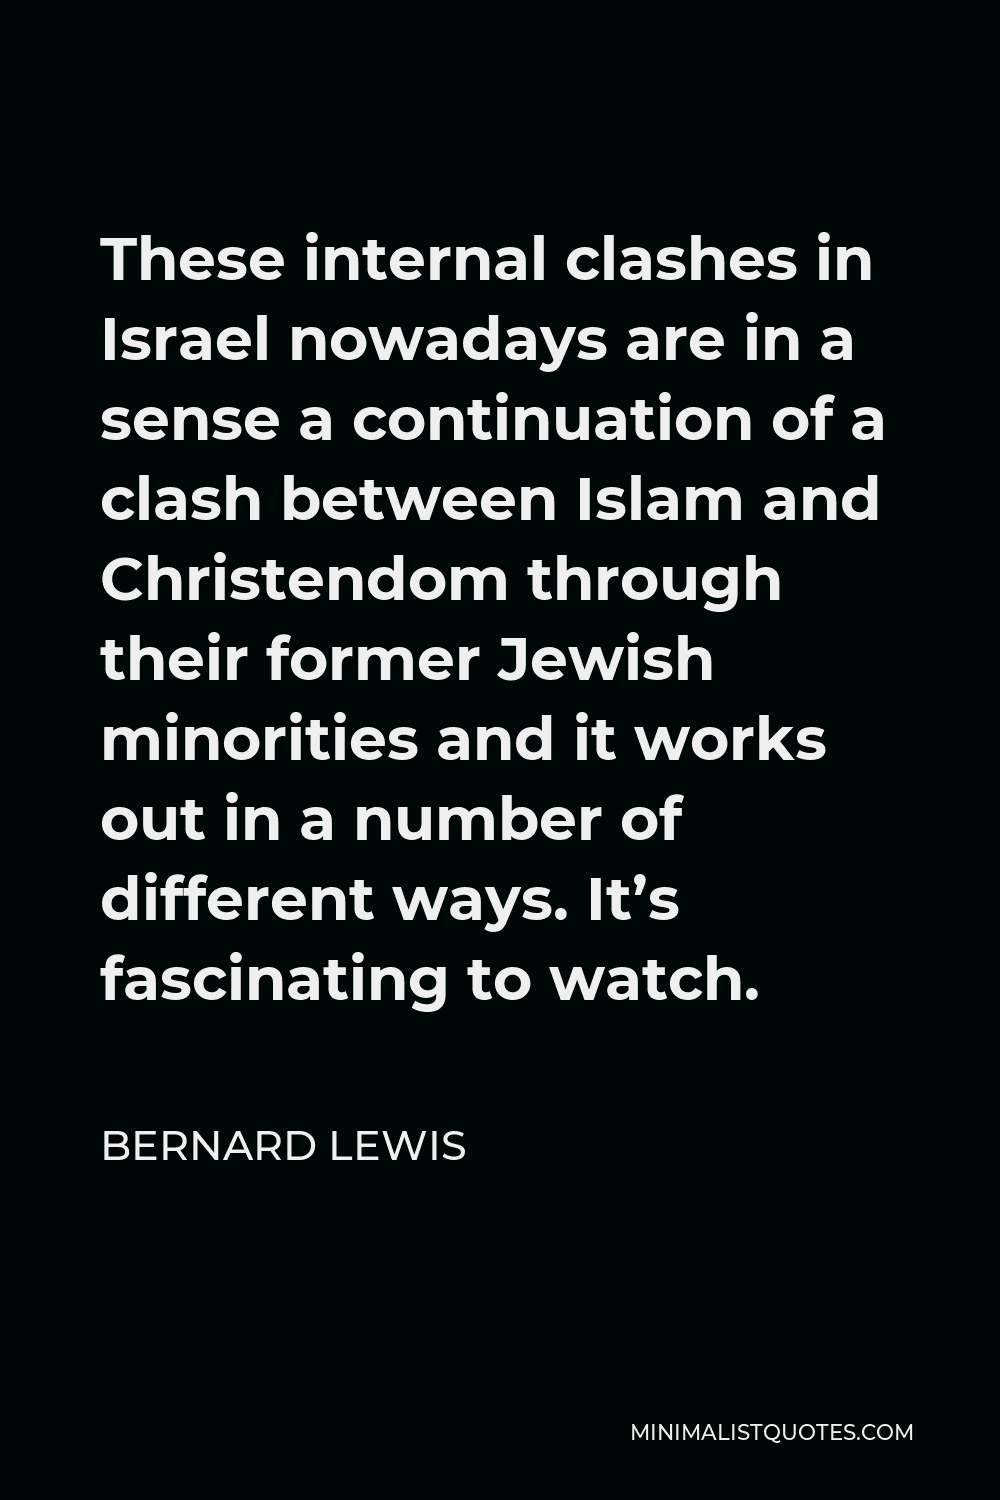 Bernard Lewis Quote - These internal clashes in Israel nowadays are in a sense a continuation of a clash between Islam and Christendom through their former Jewish minorities and it works out in a number of different ways. It’s fascinating to watch.